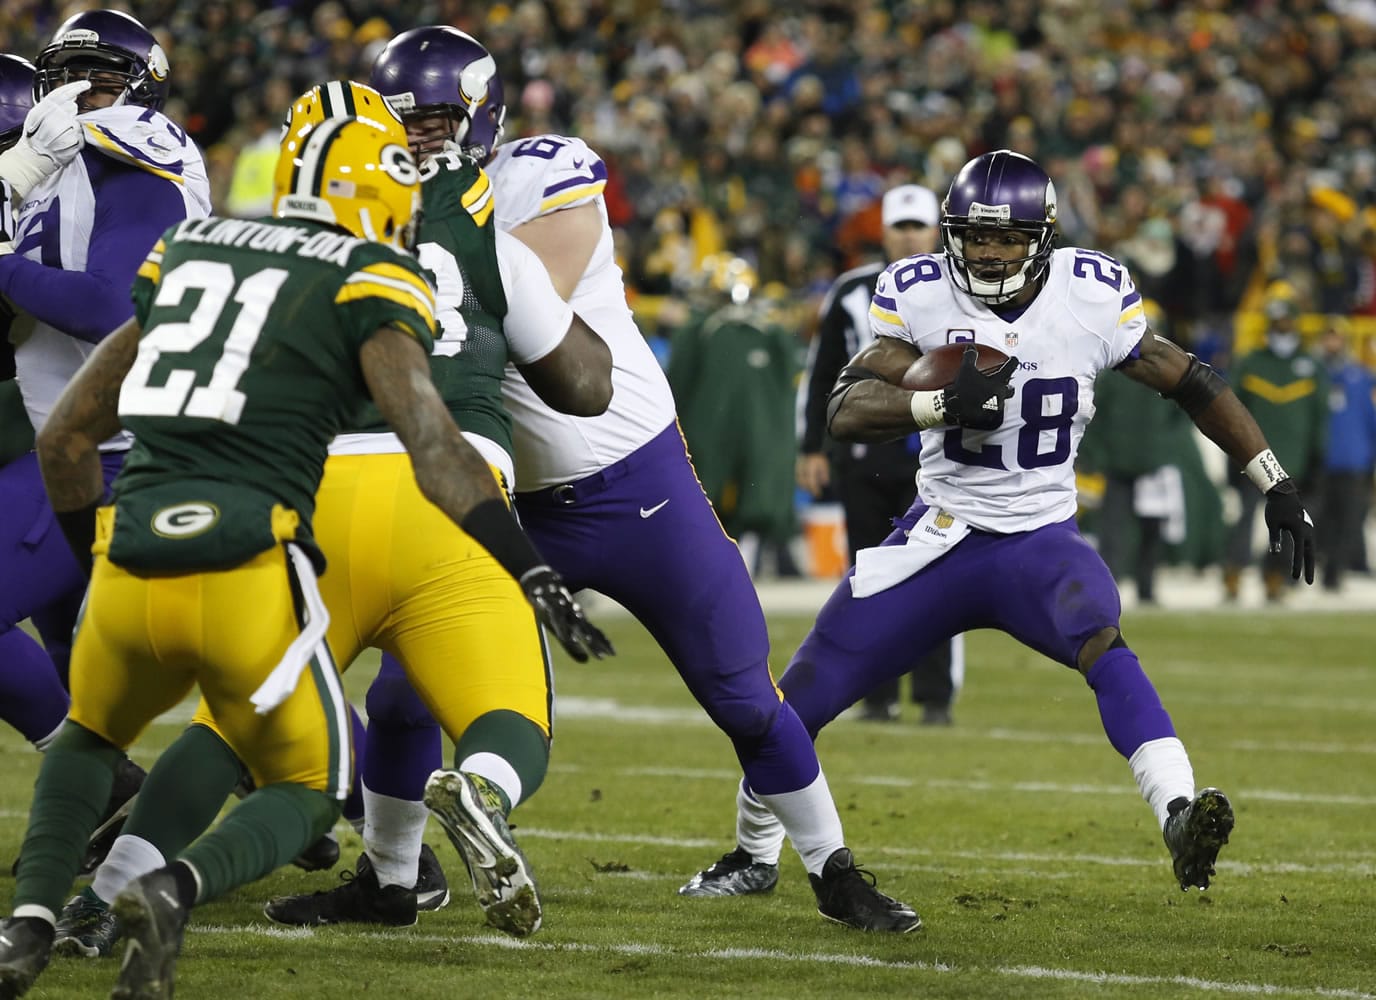 Minnesota Vikings' Adrian Peterson runs during the second half an NFL football game against the Green Bay Packers Sunday, Jan. 3, 2016, in Green Bay, Wis.